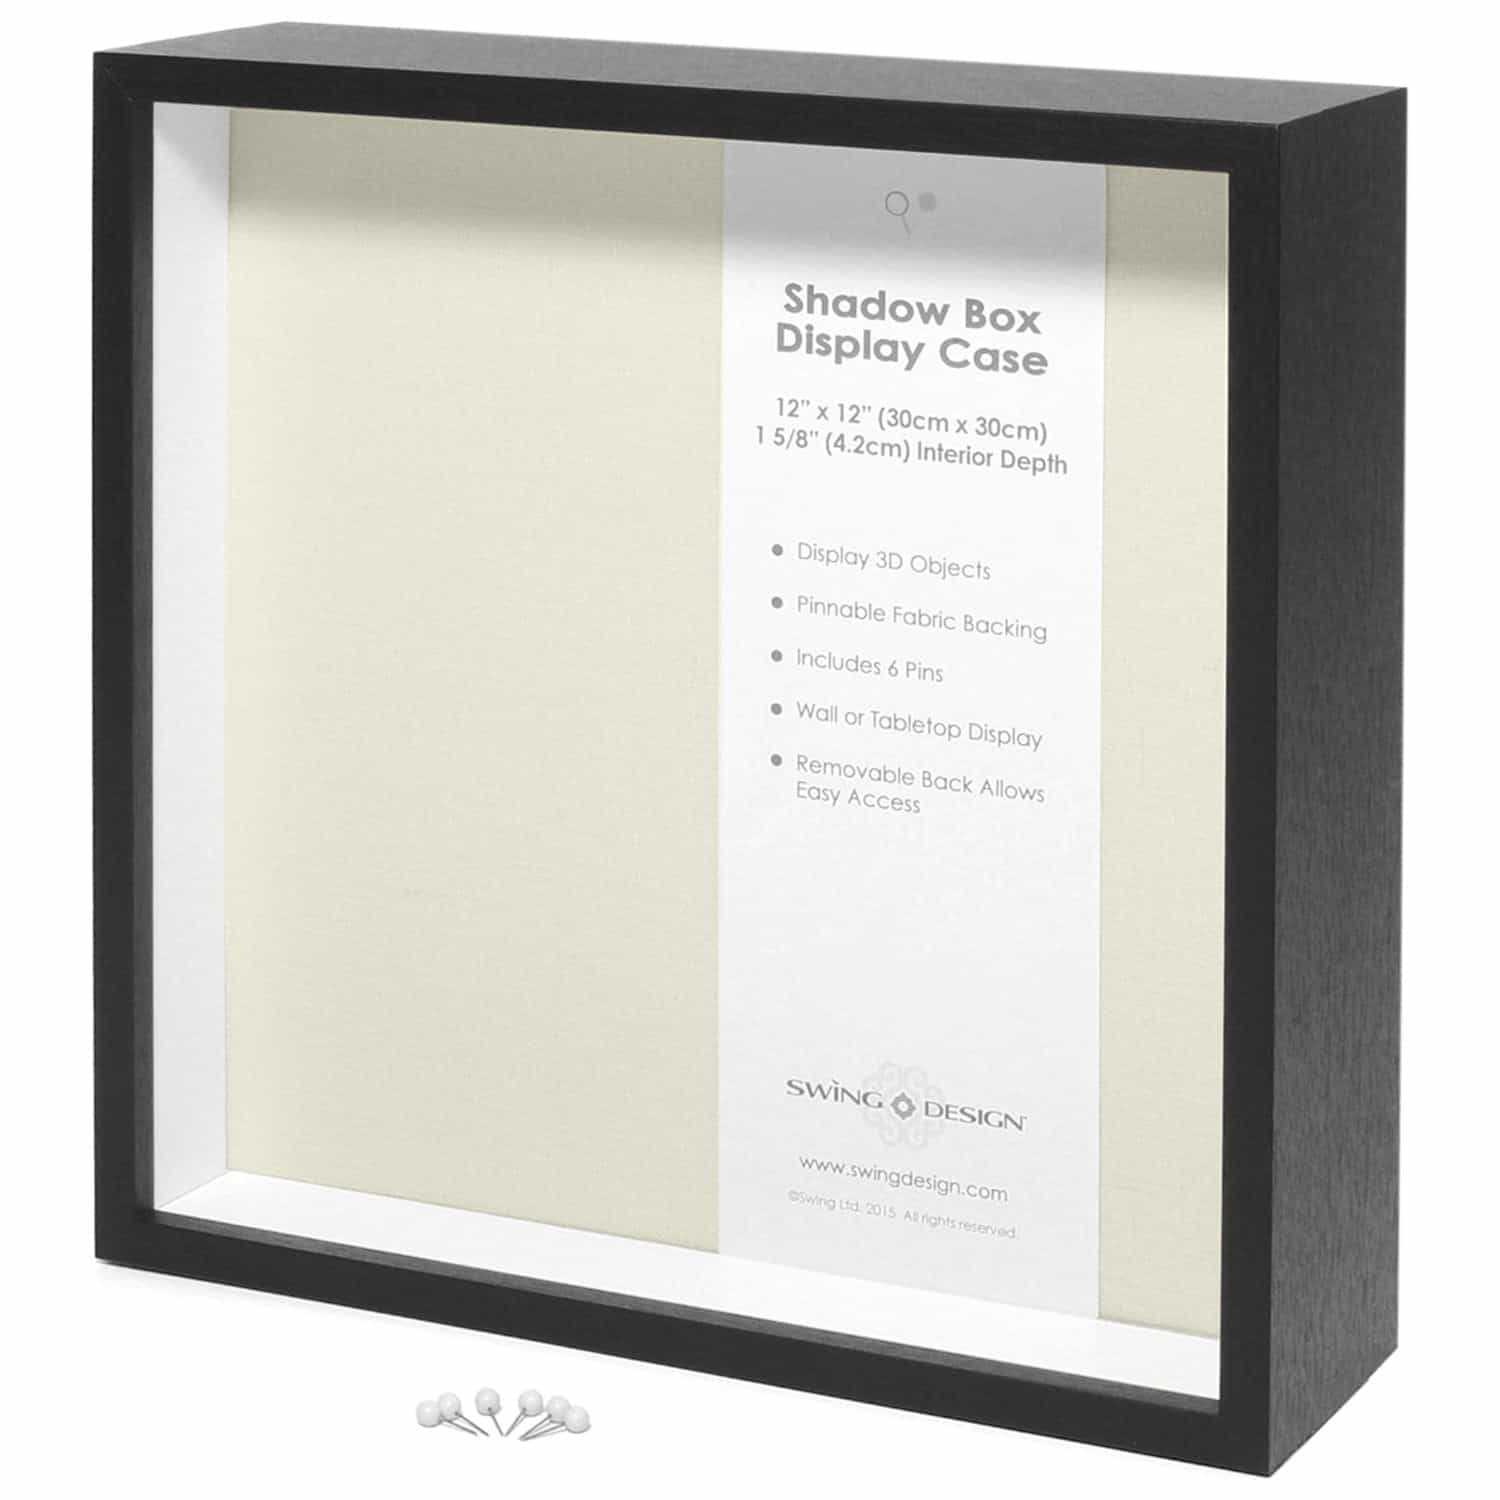 Awesome Crafting Blanks You Can Get on Amazon Prime : Shadow Box | www.thepinningmama.com